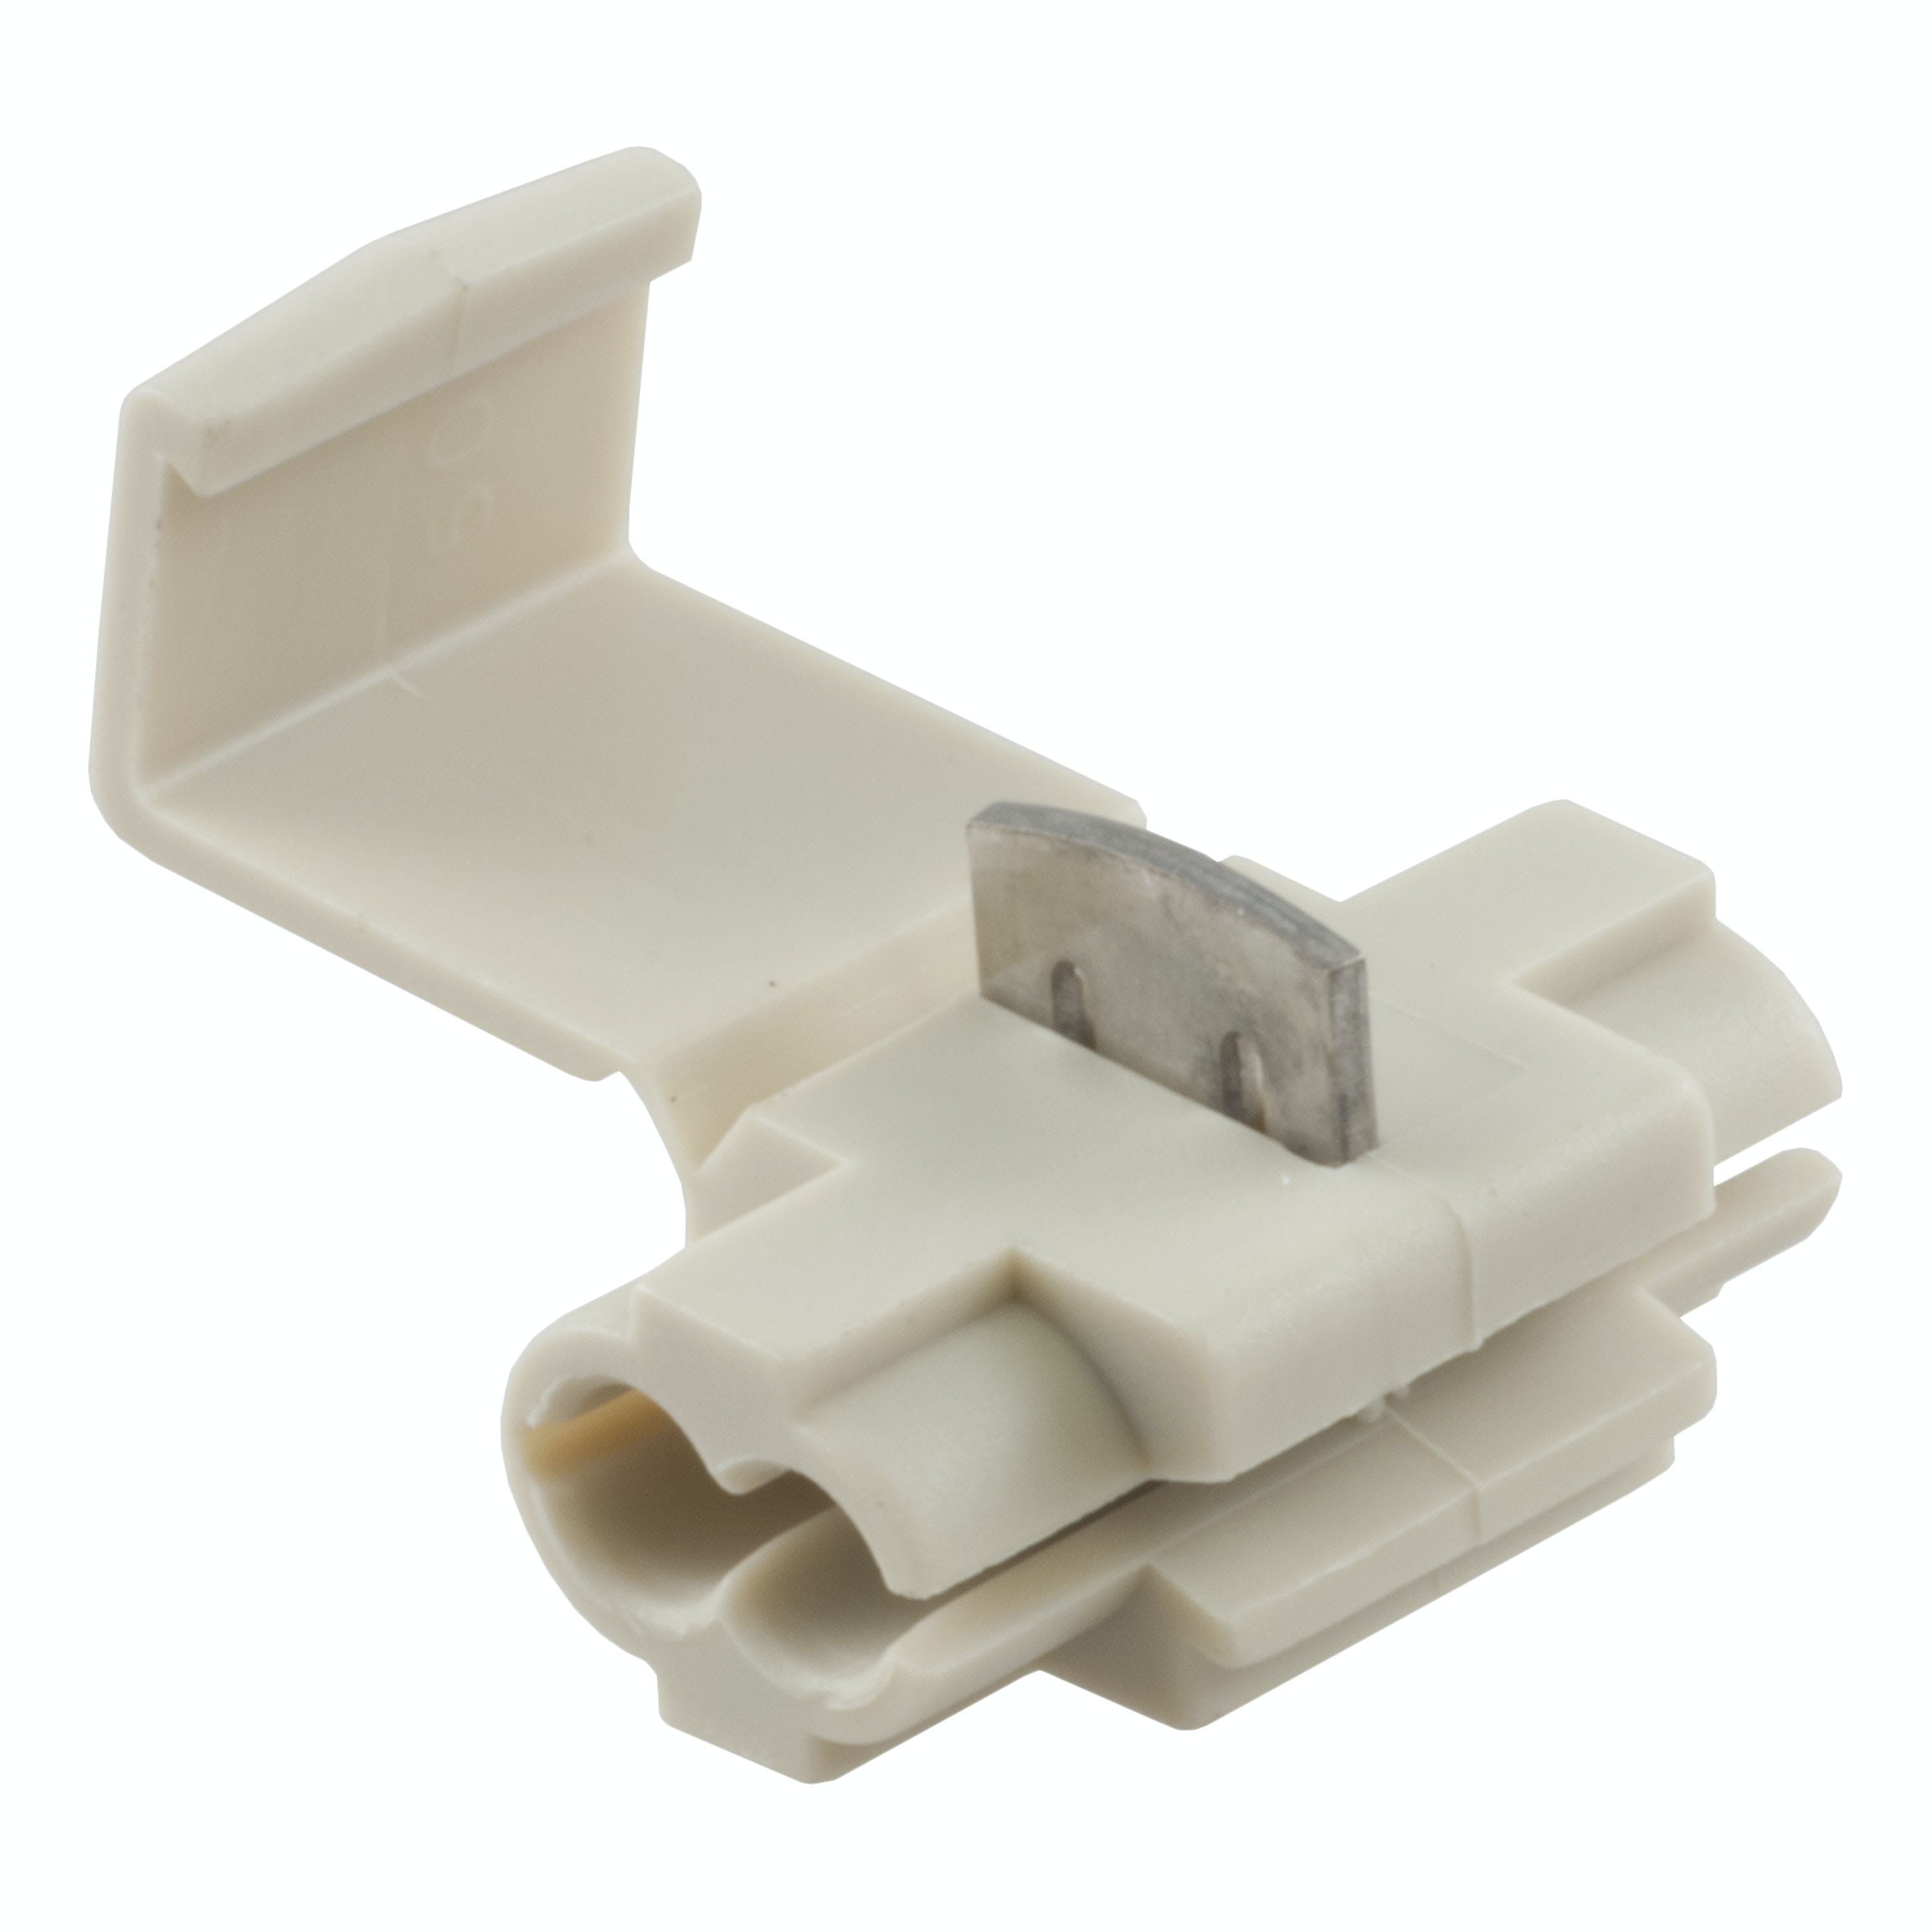 CURT 59906 Snap Lock Double-Run Tap Connectors (18-14 Wire Gauge, 100-Pack)